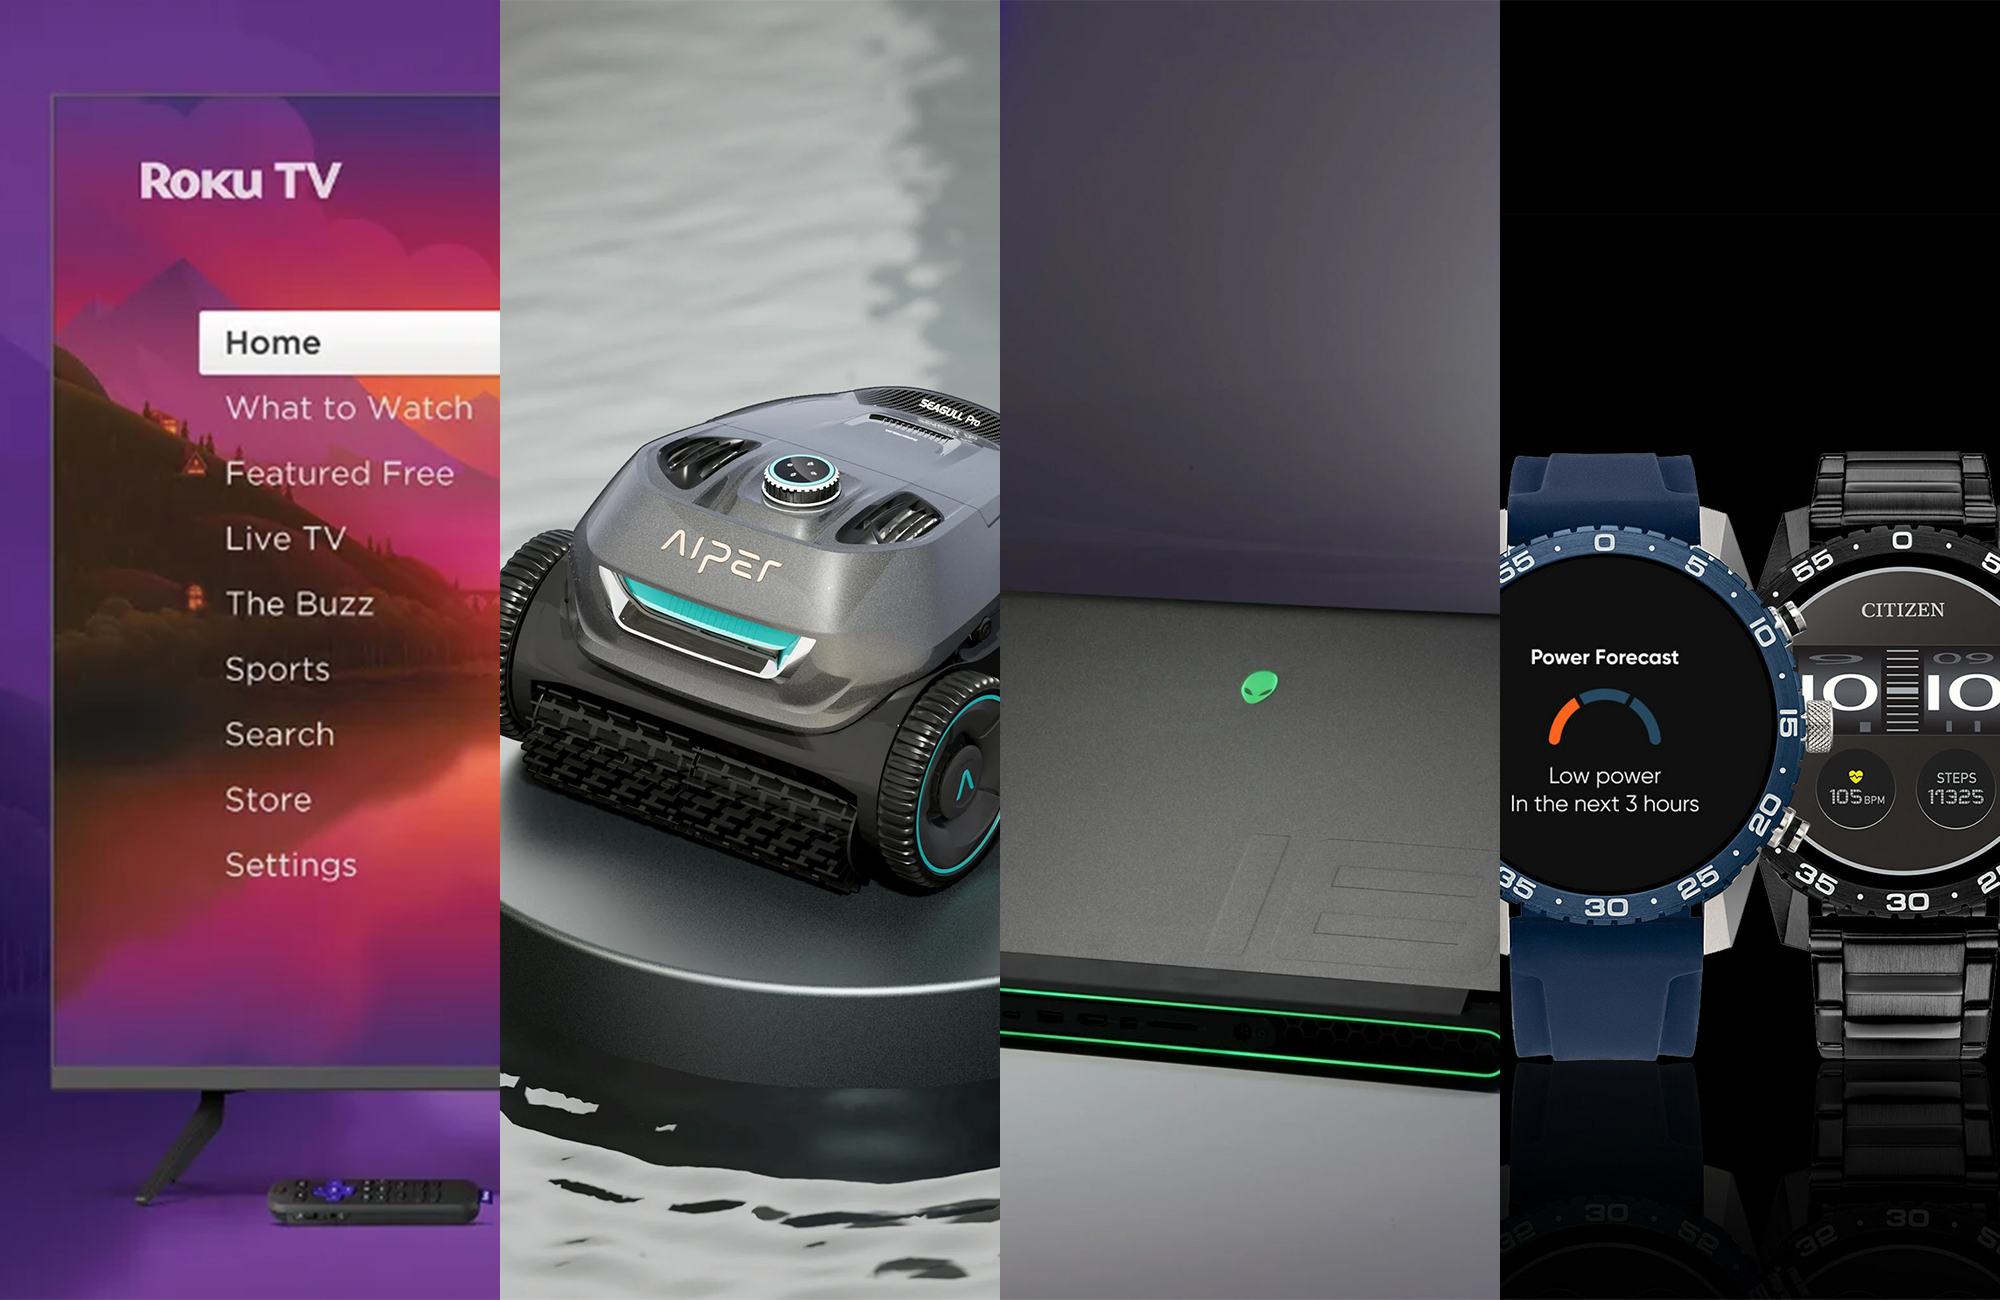 The Top 15 Innovative Gadgets to Watch Out For in 2023